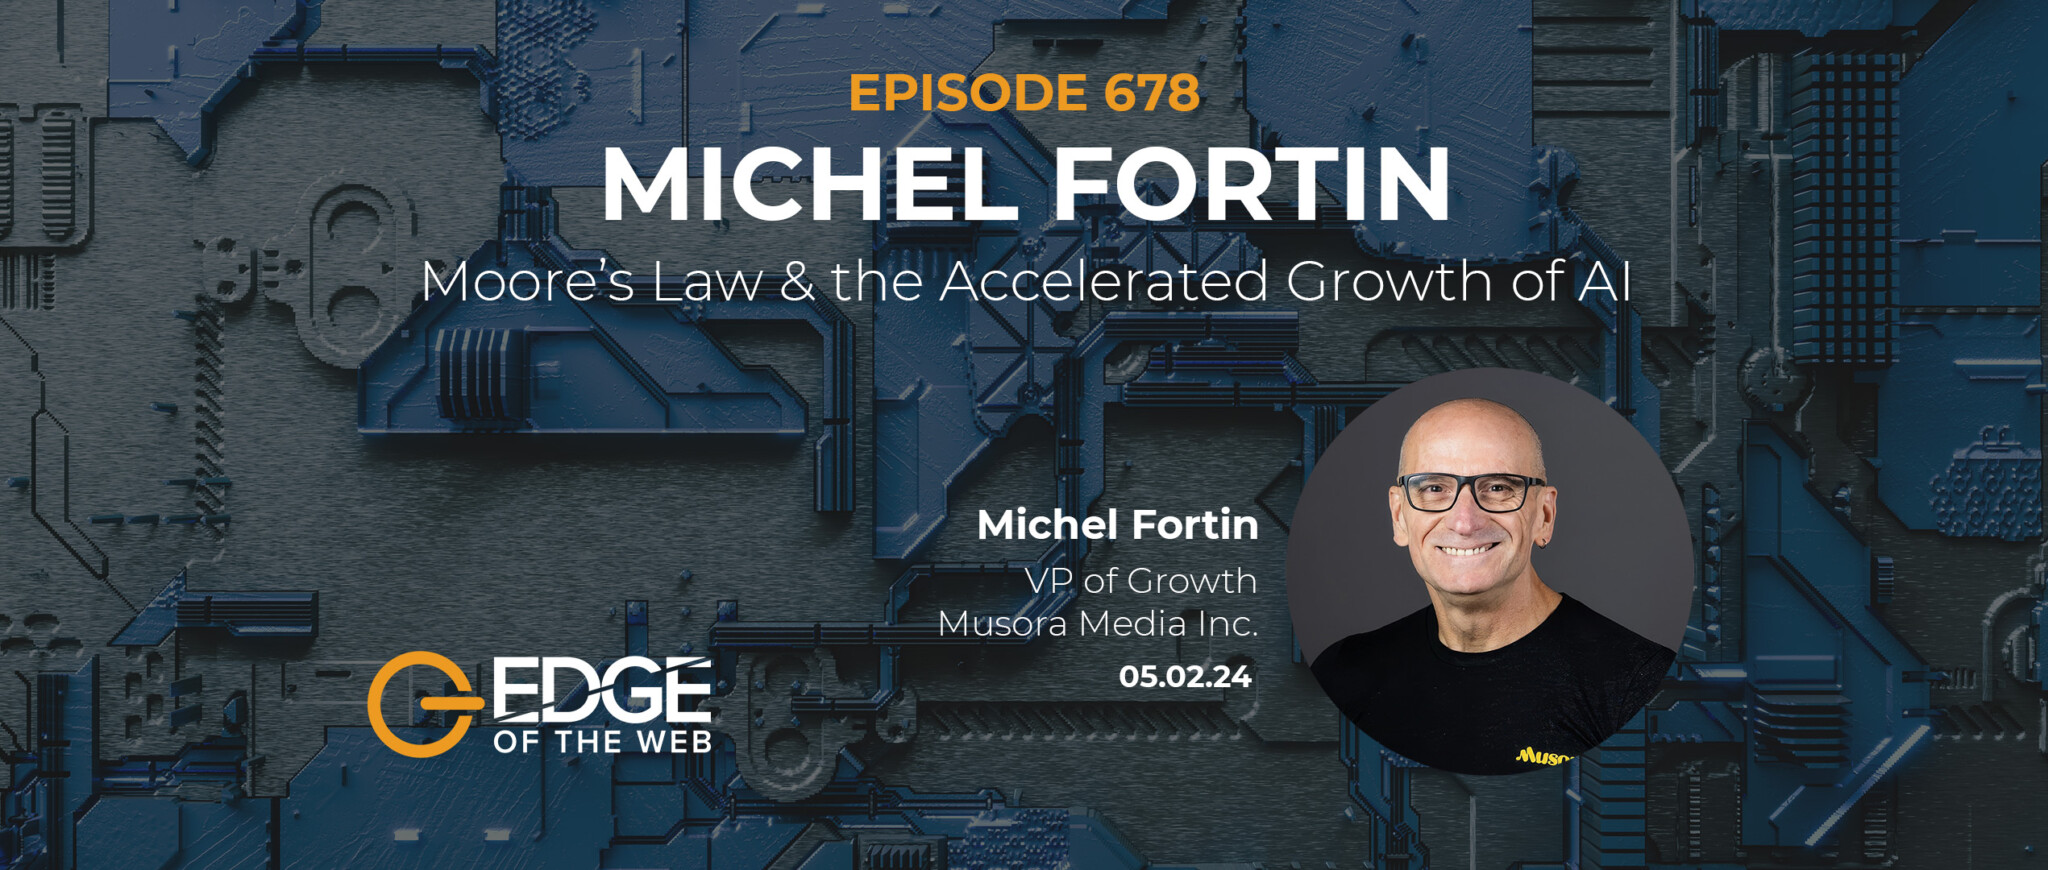 Episode 678: Moore’s Law & the Accelerated Growth of AI with Michel Fortin